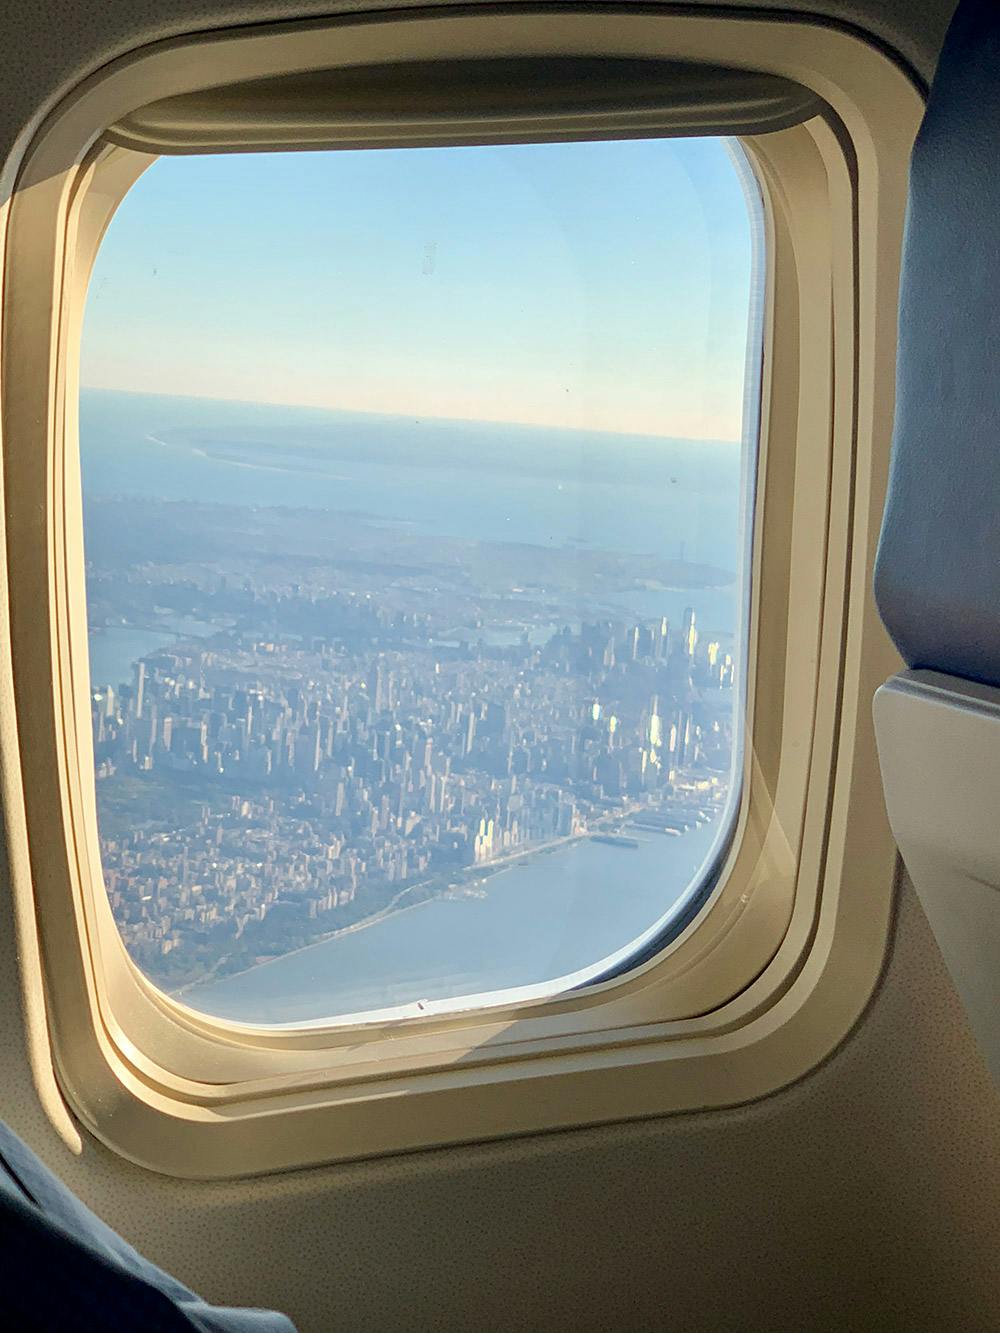 Image showing the view of New York City by plane.